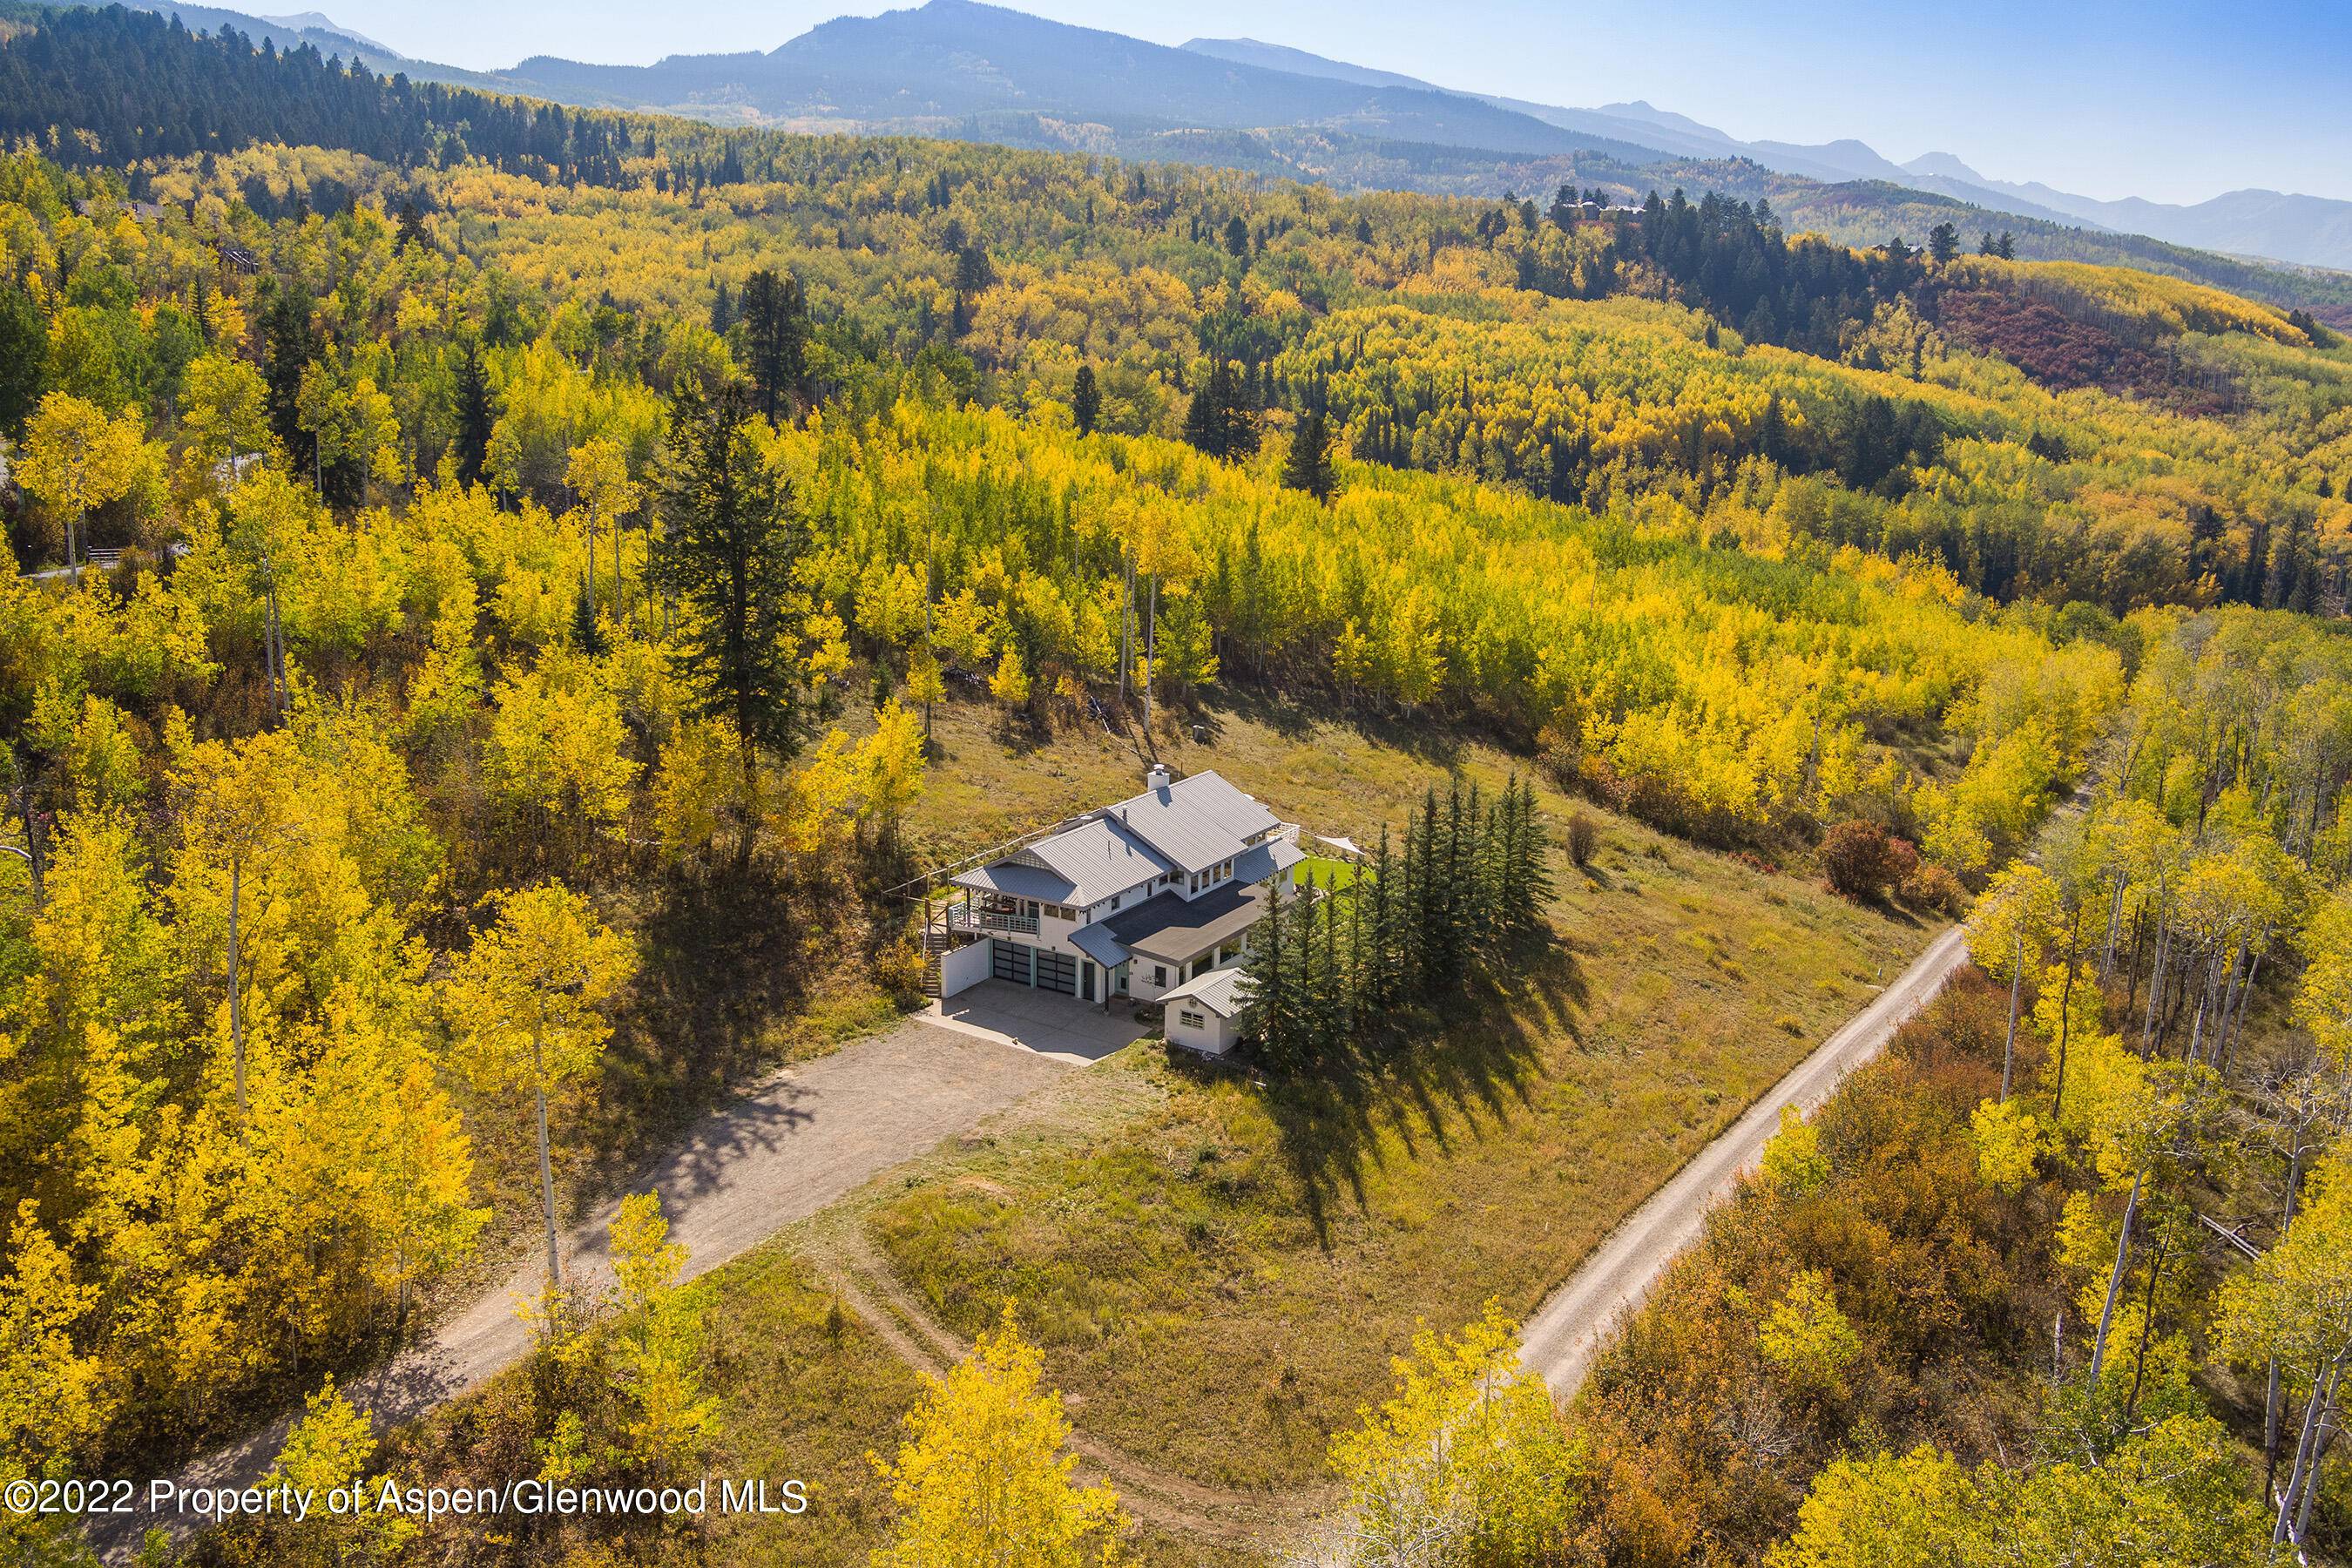 Located just minutes from Aspen, this coveted West Buttermilk sanctuary sits on 36.